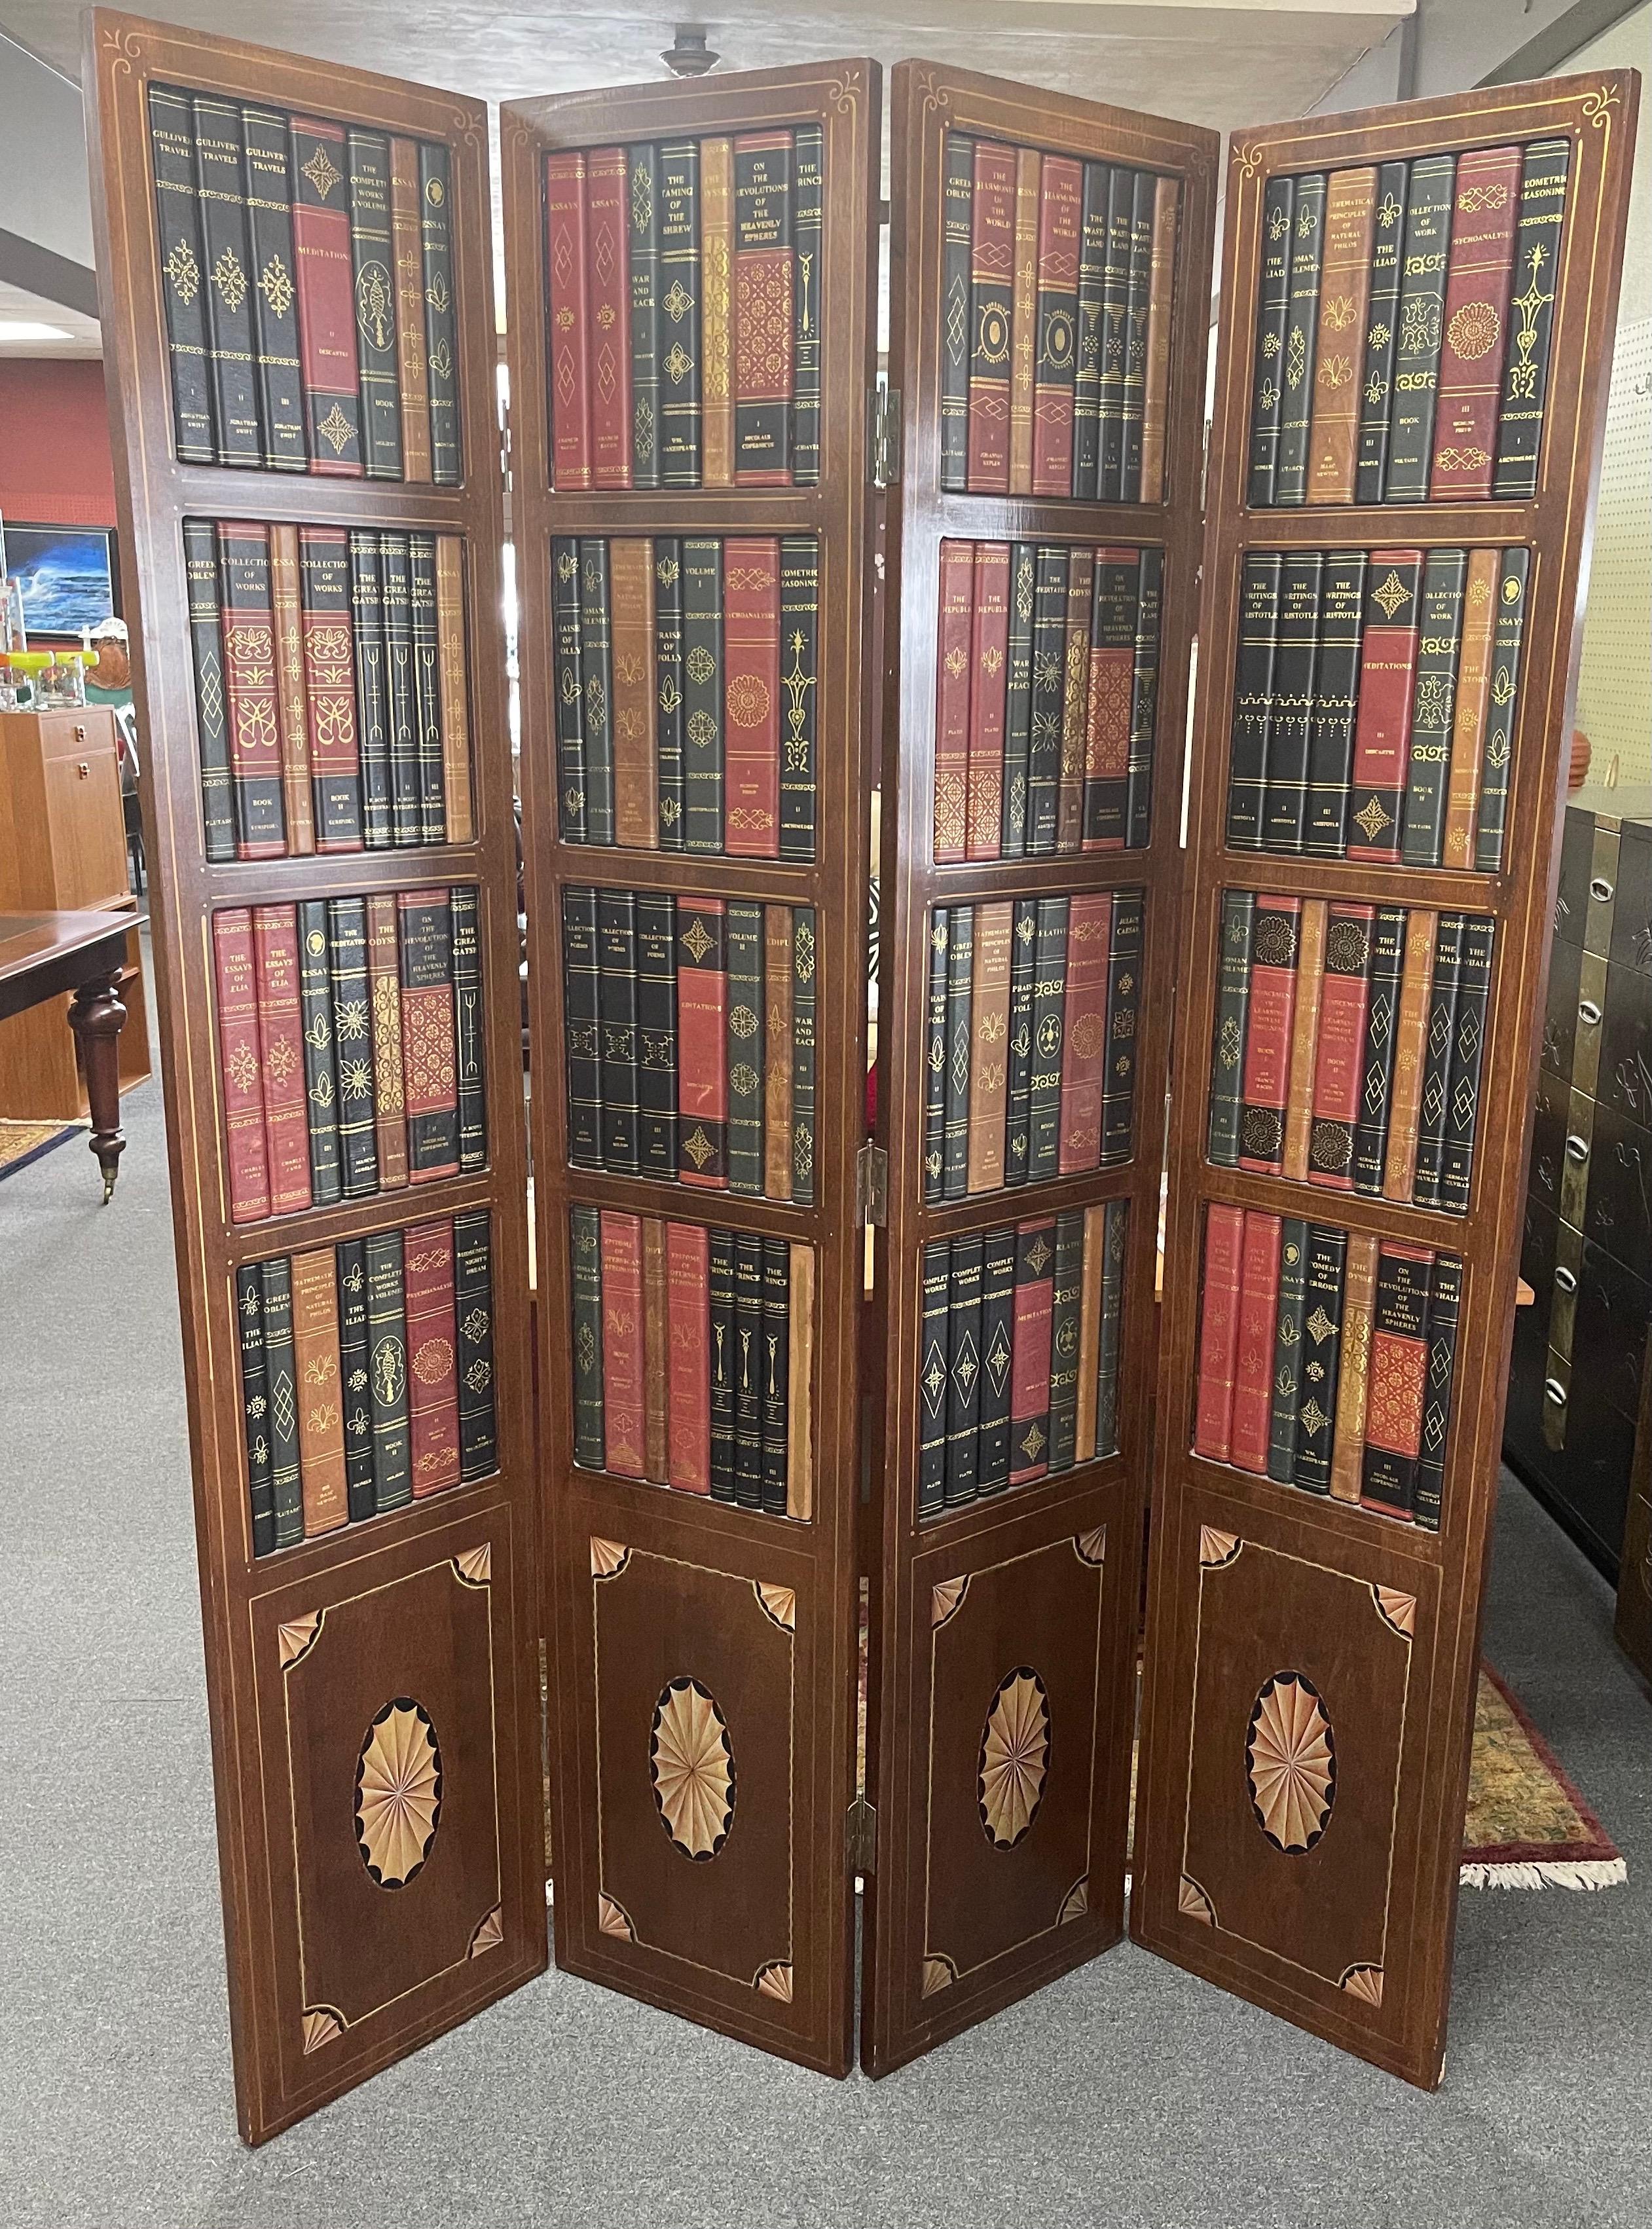 A beautiful leather bound library book four-panel folding screen / room divider by Maitland Smith, circa 1970s. The screen is made of mahogany with leather faux book bindings and has for 15